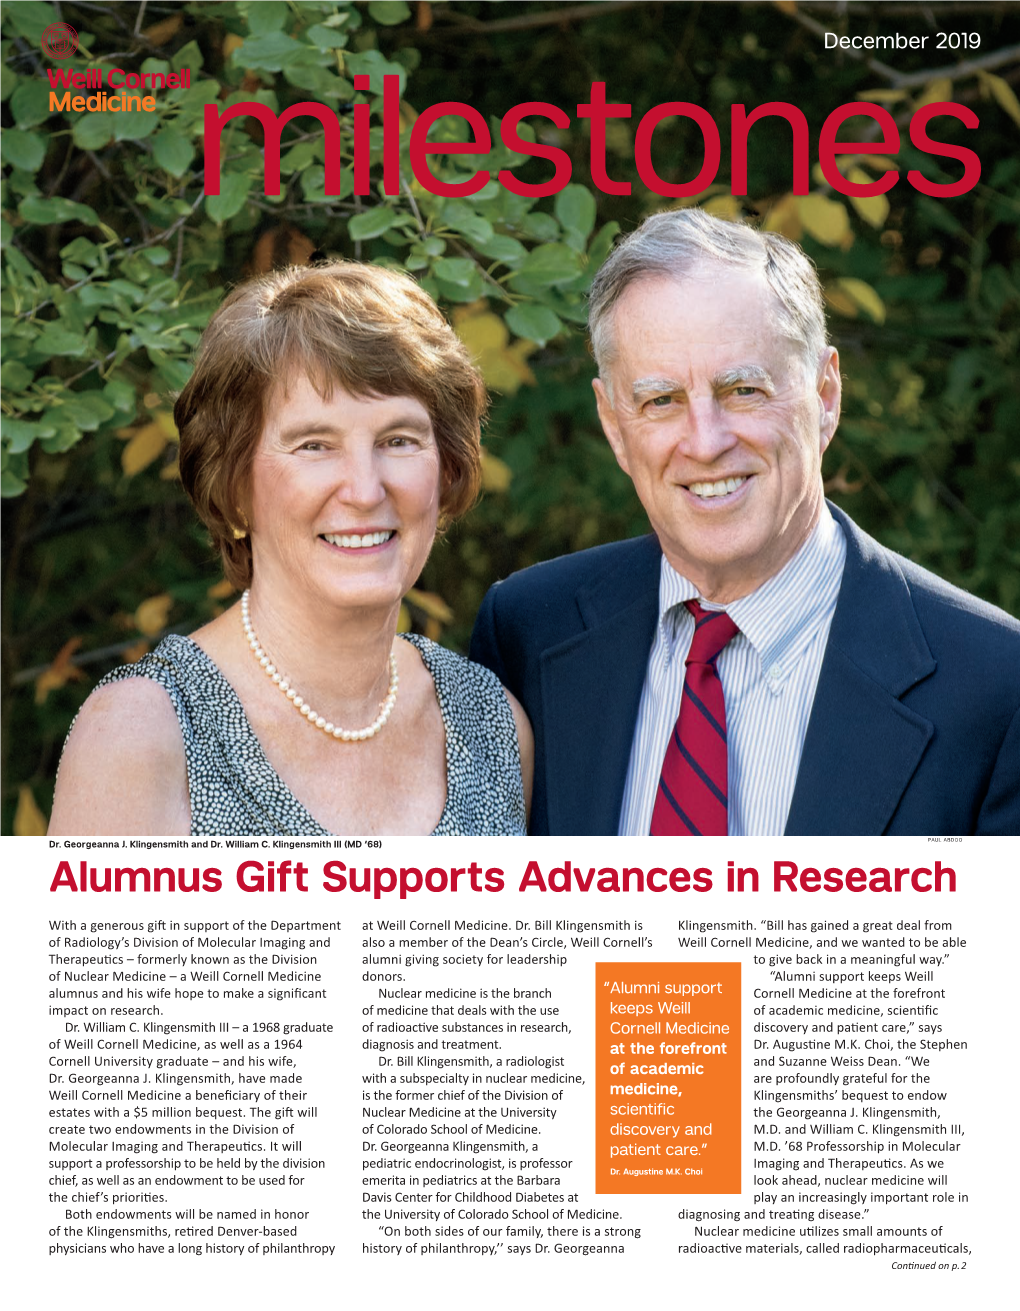 Alumnus Gift Supports Advances in Research